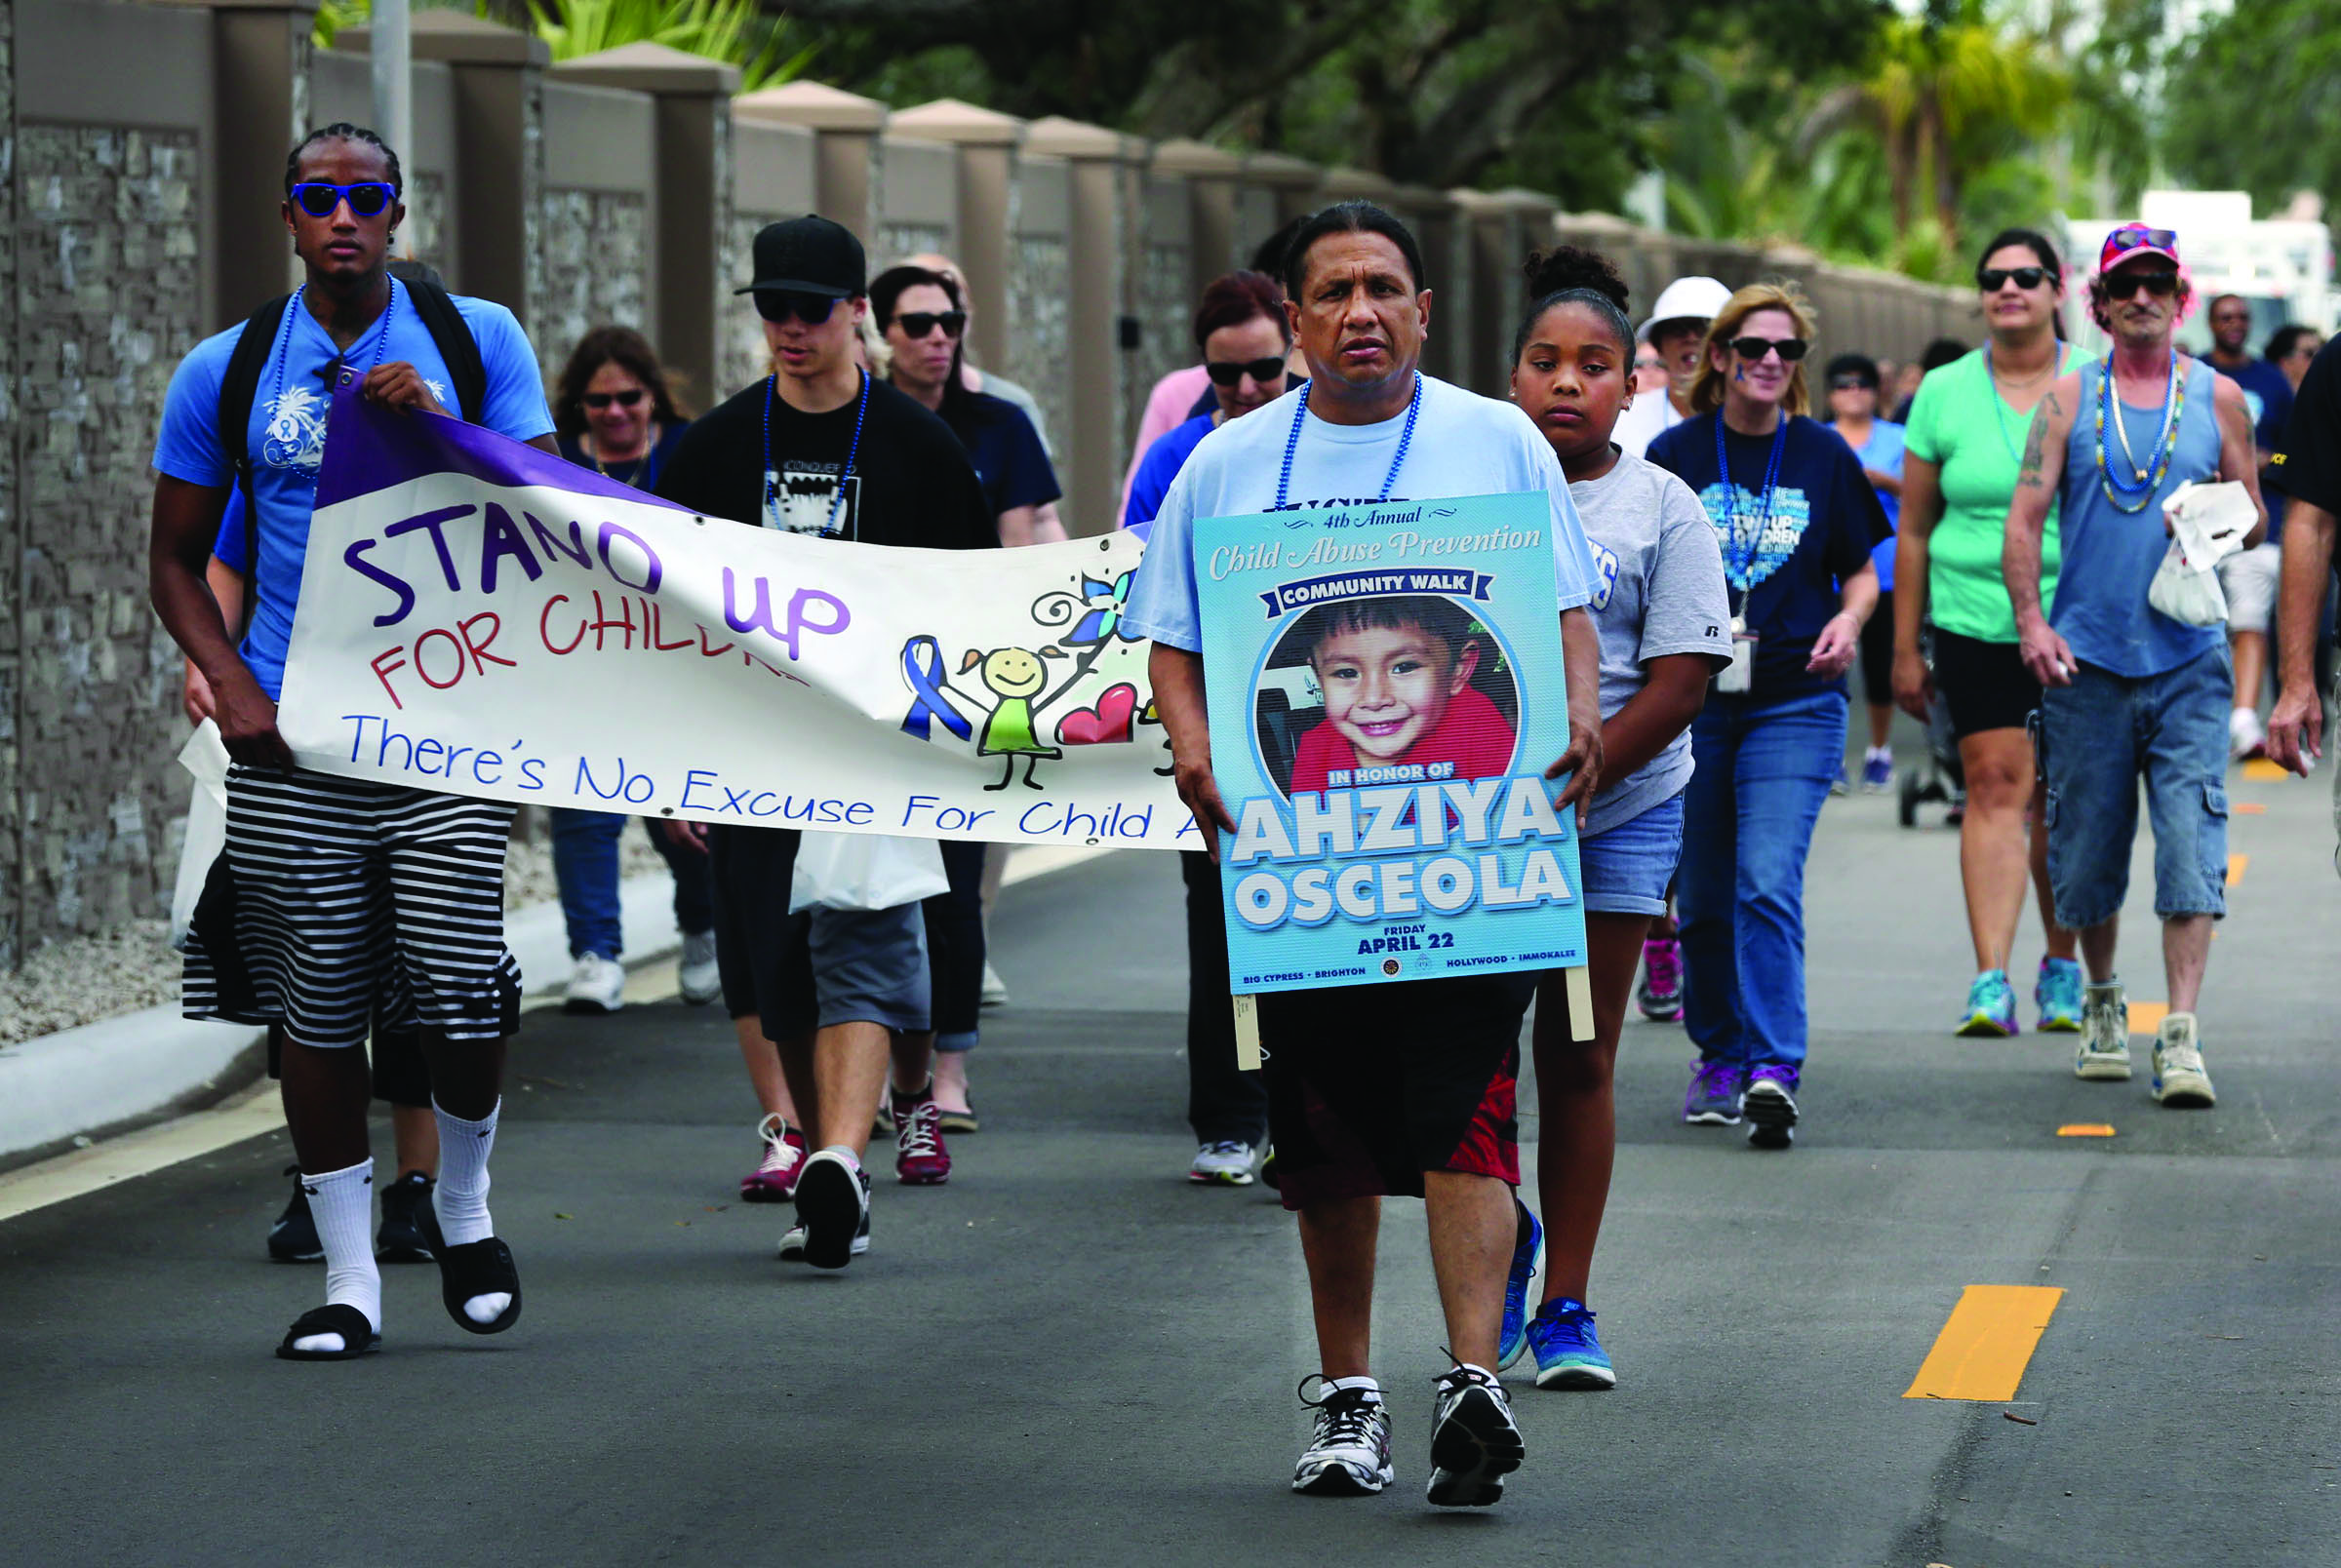 Tribal citizens and friends demonstrate on the Hollywood Reservation April 22 to stand up for children and against child abuse. Since 1983, April has been designated National Child Abuse Prevention Month for communities to work together to prevent abuse and neglect, and promote the well-being of children and families. 